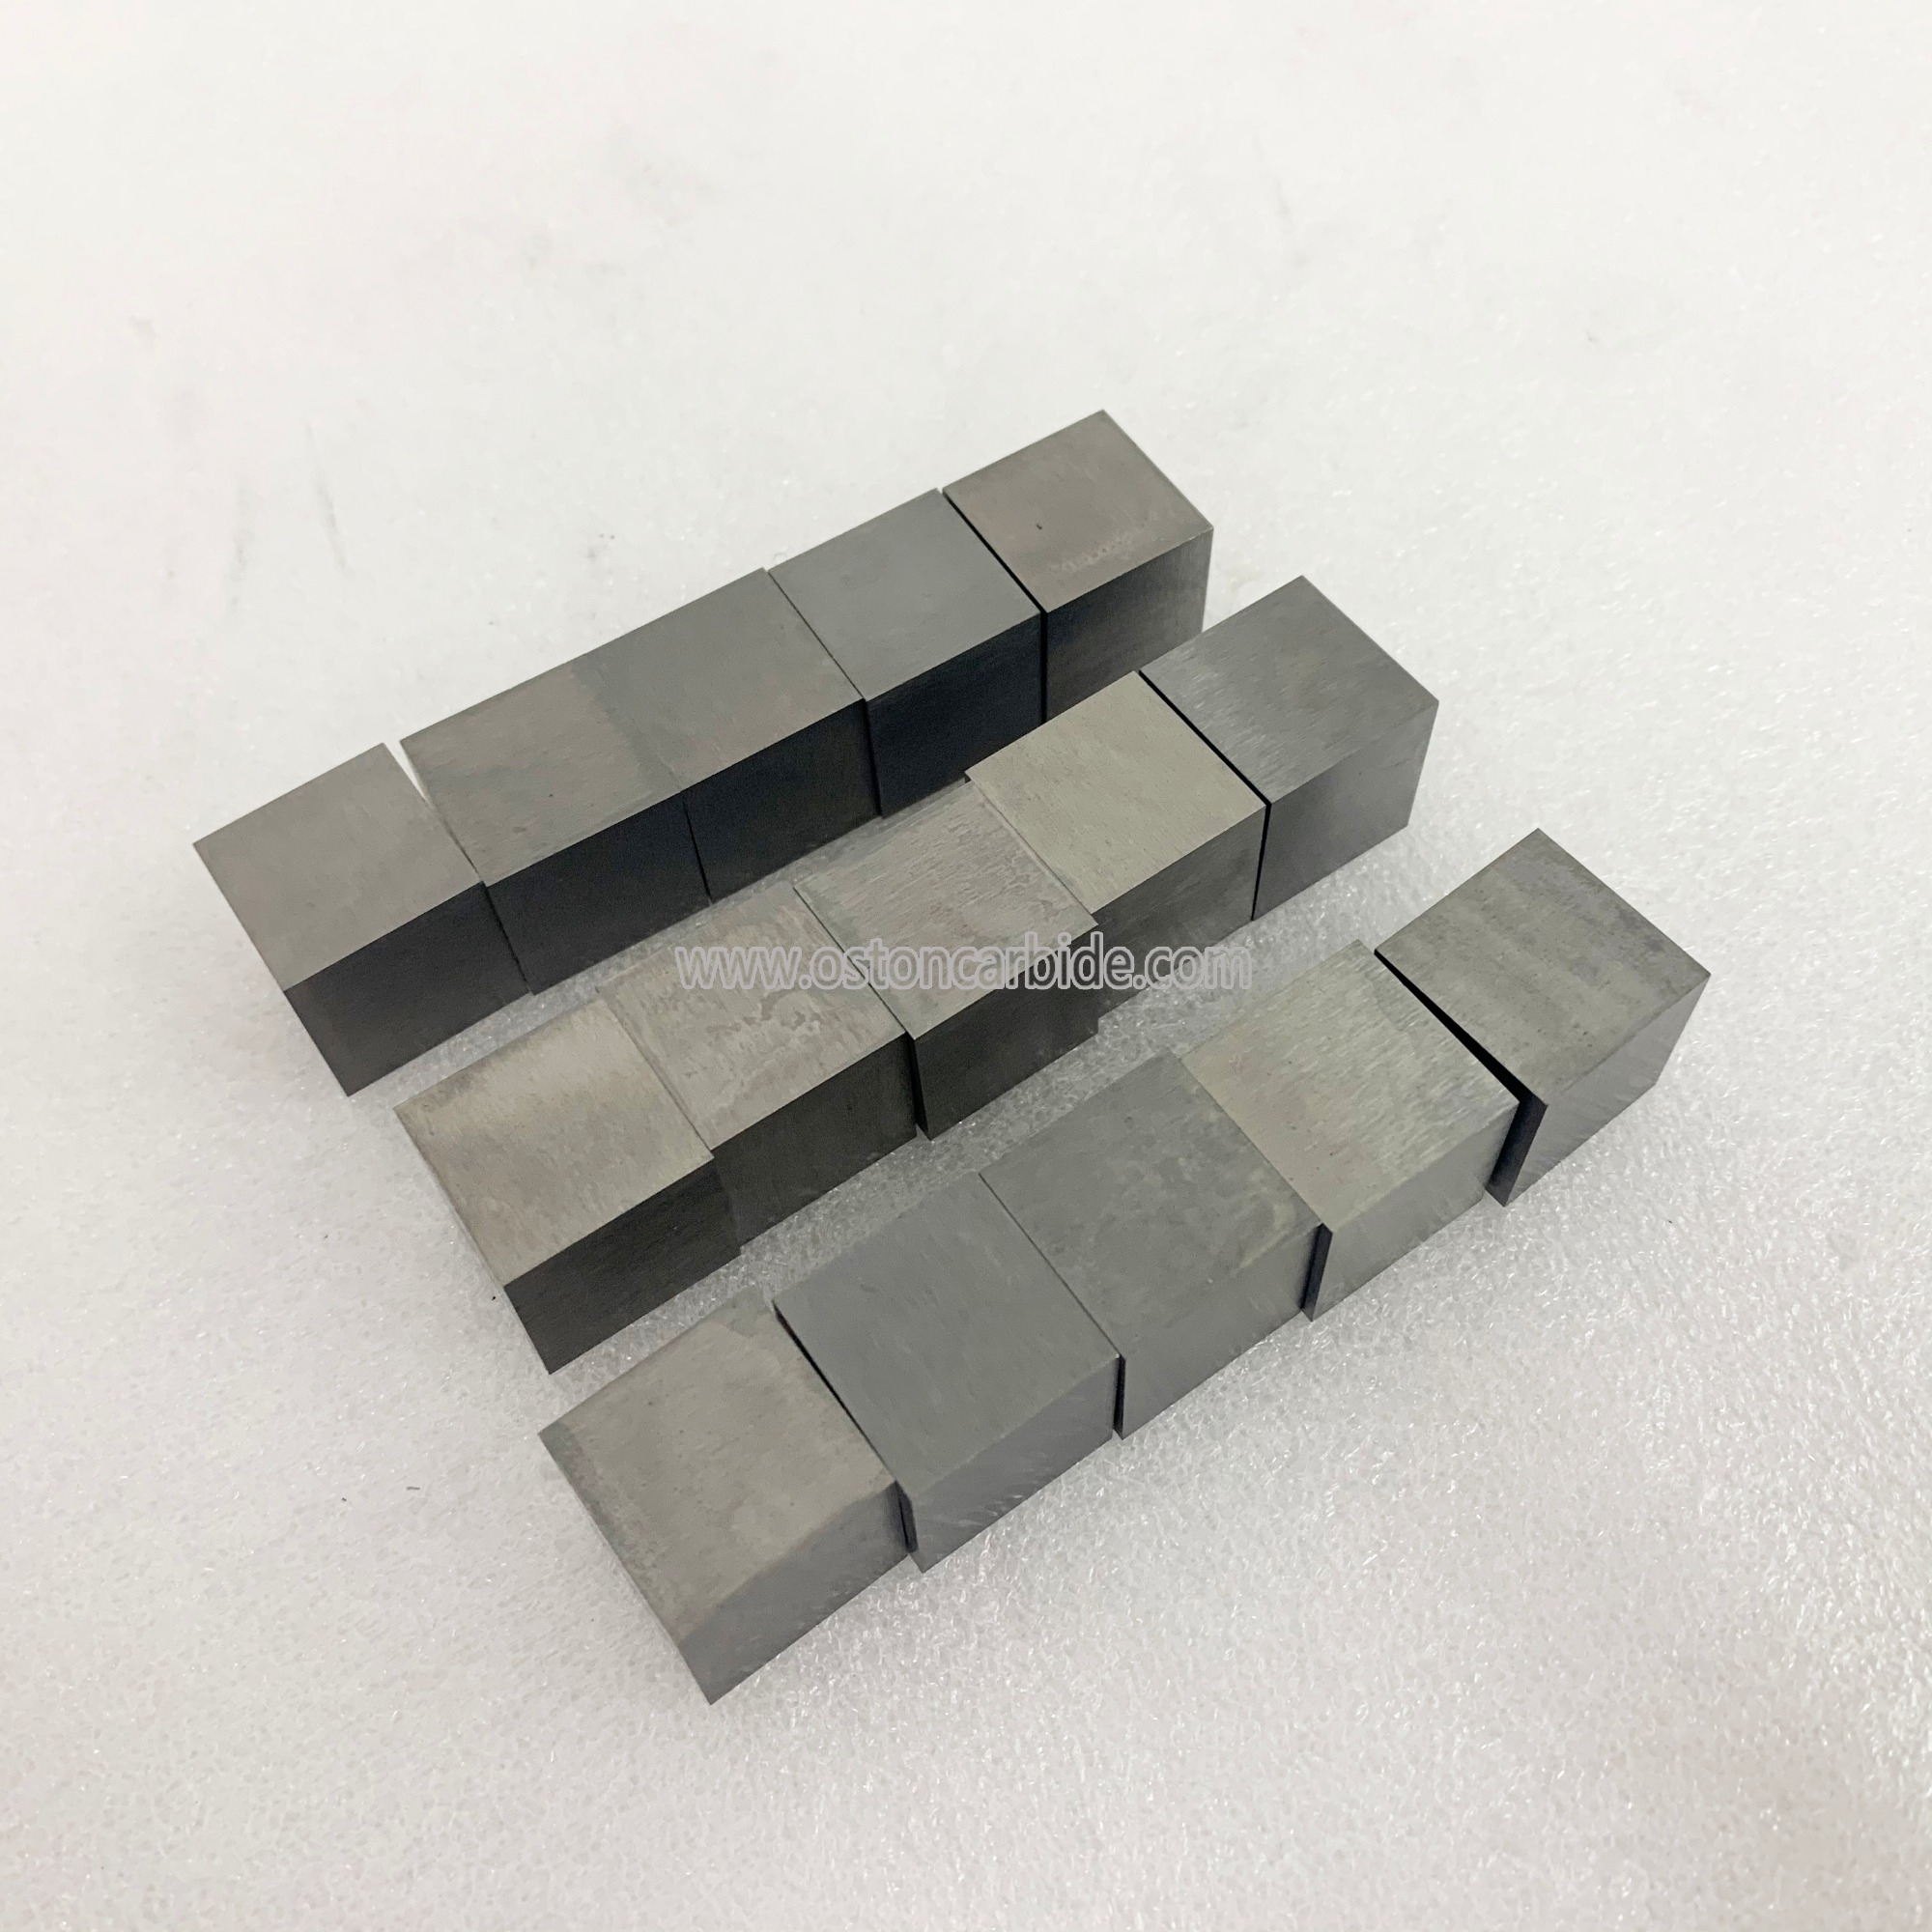 YG20C Tungsten Carbide Cube,Carbide Inserts for Nail Tools 